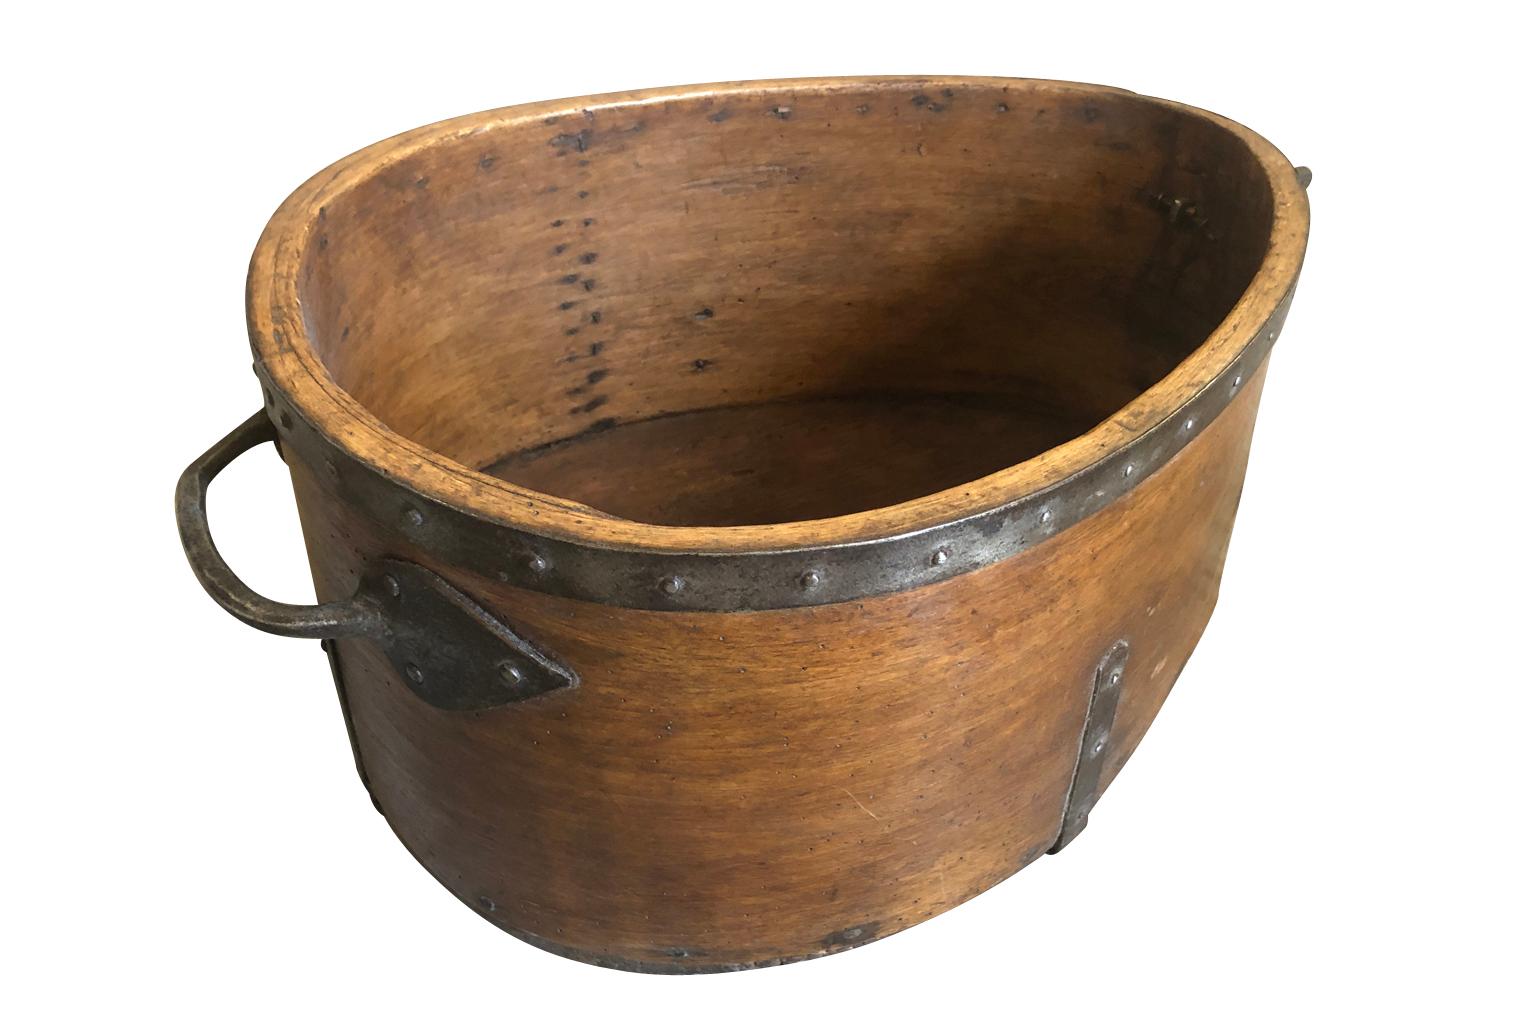 A very charming French 19th century grain measure of unusual form crafted from wood and iron. A terrific decorative vessel or container for a kitchen.